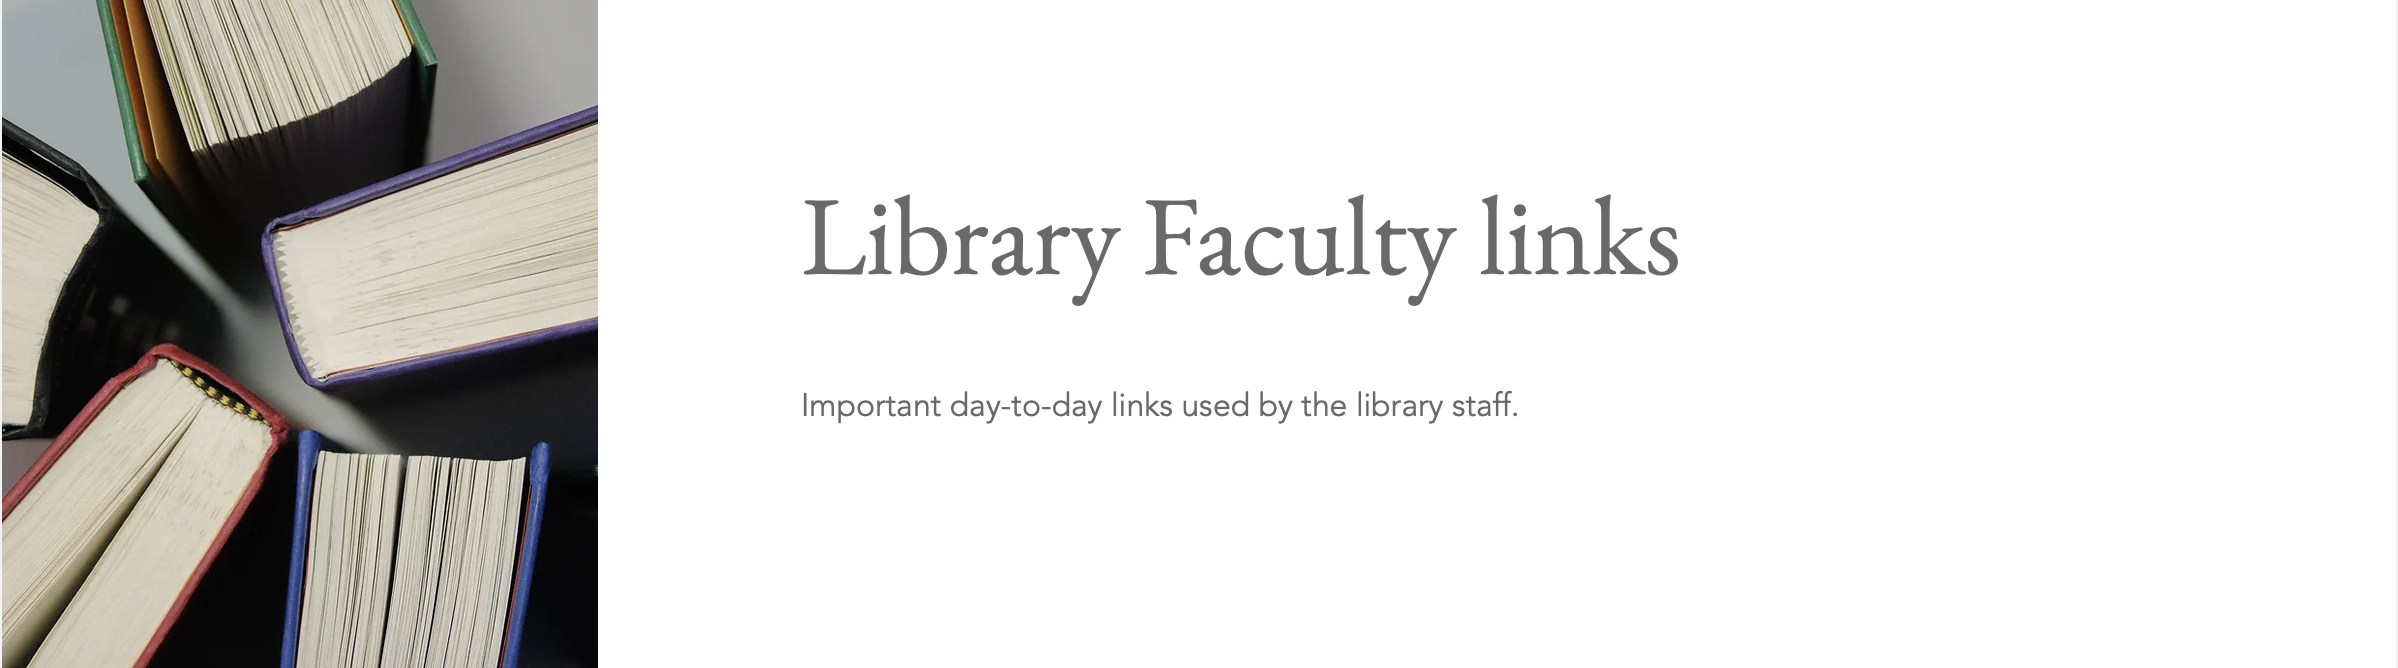 Library Faculty Links important day to day links used by the library staff